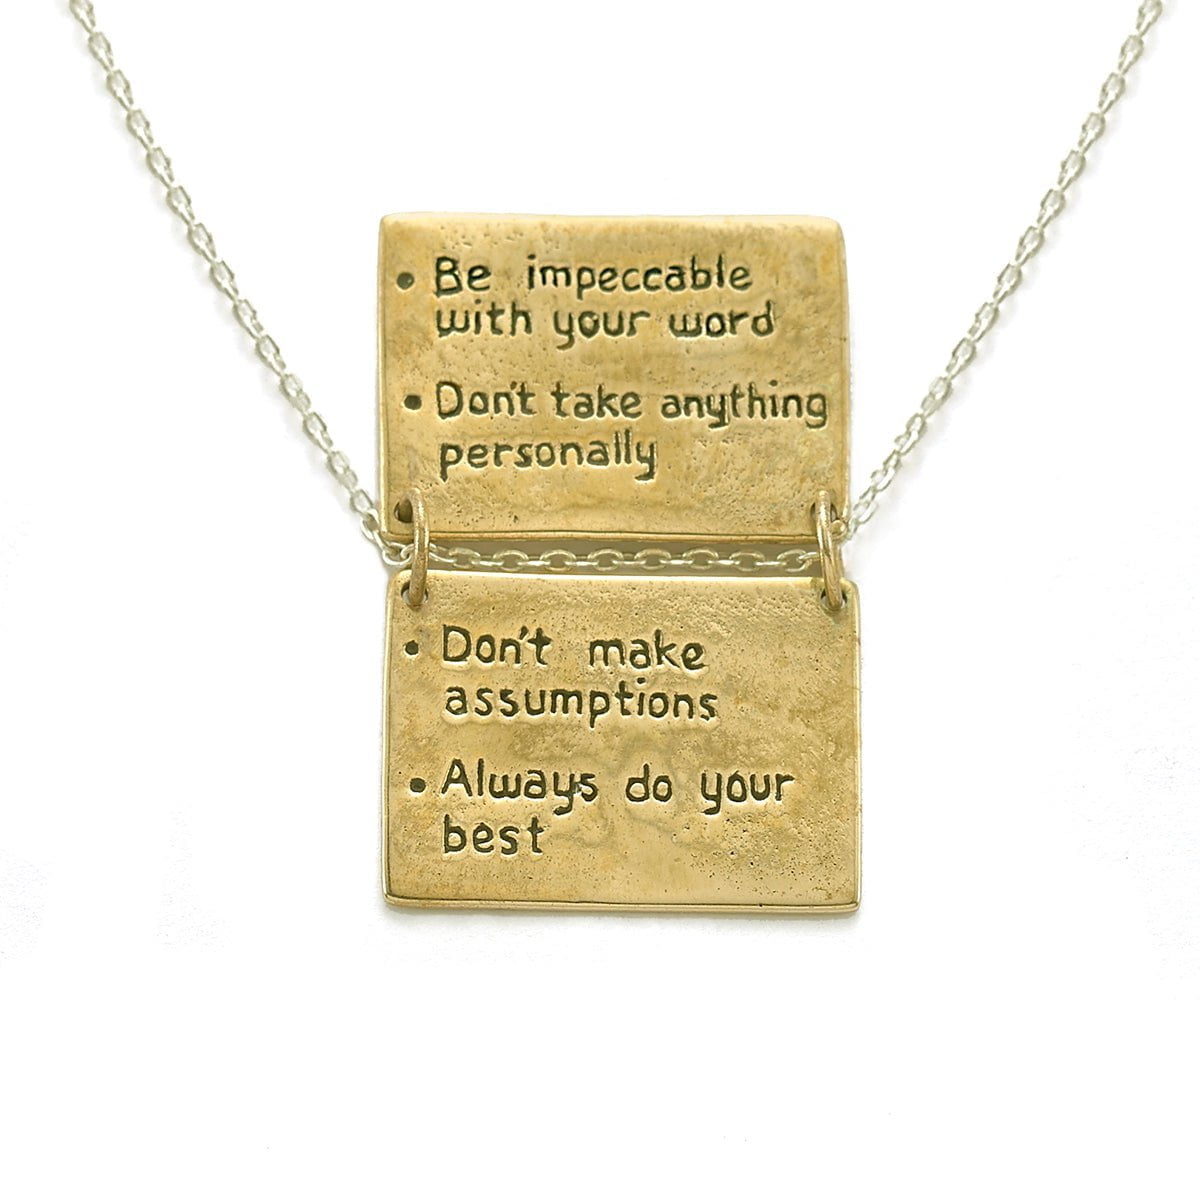 Jewelry Evolution Necklace The Four Agreements Book Necklace